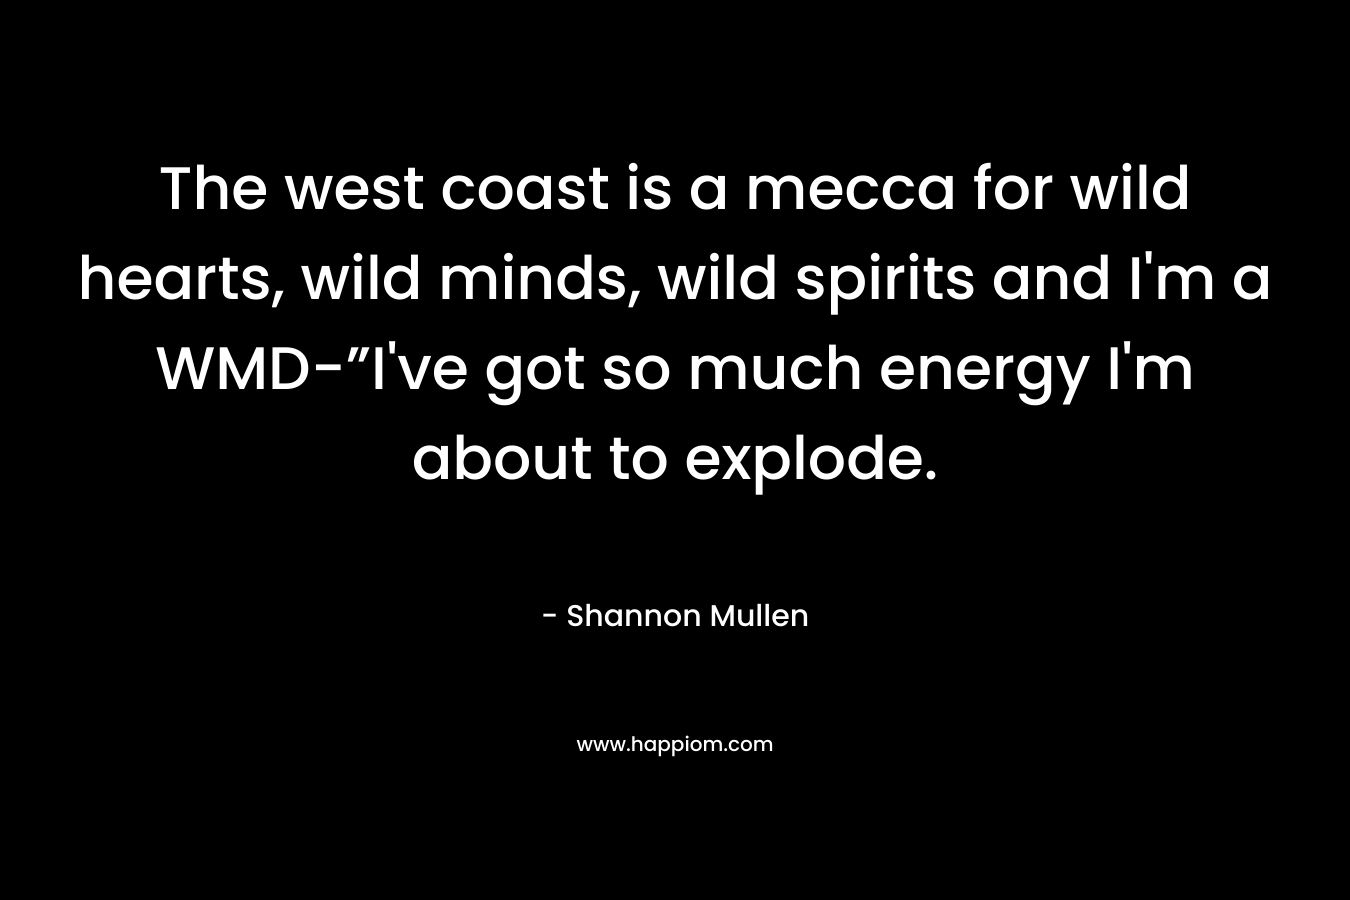 The west coast is a mecca for wild hearts, wild minds, wild spirits and I'm a WMD-”I've got so much energy I'm about to explode.